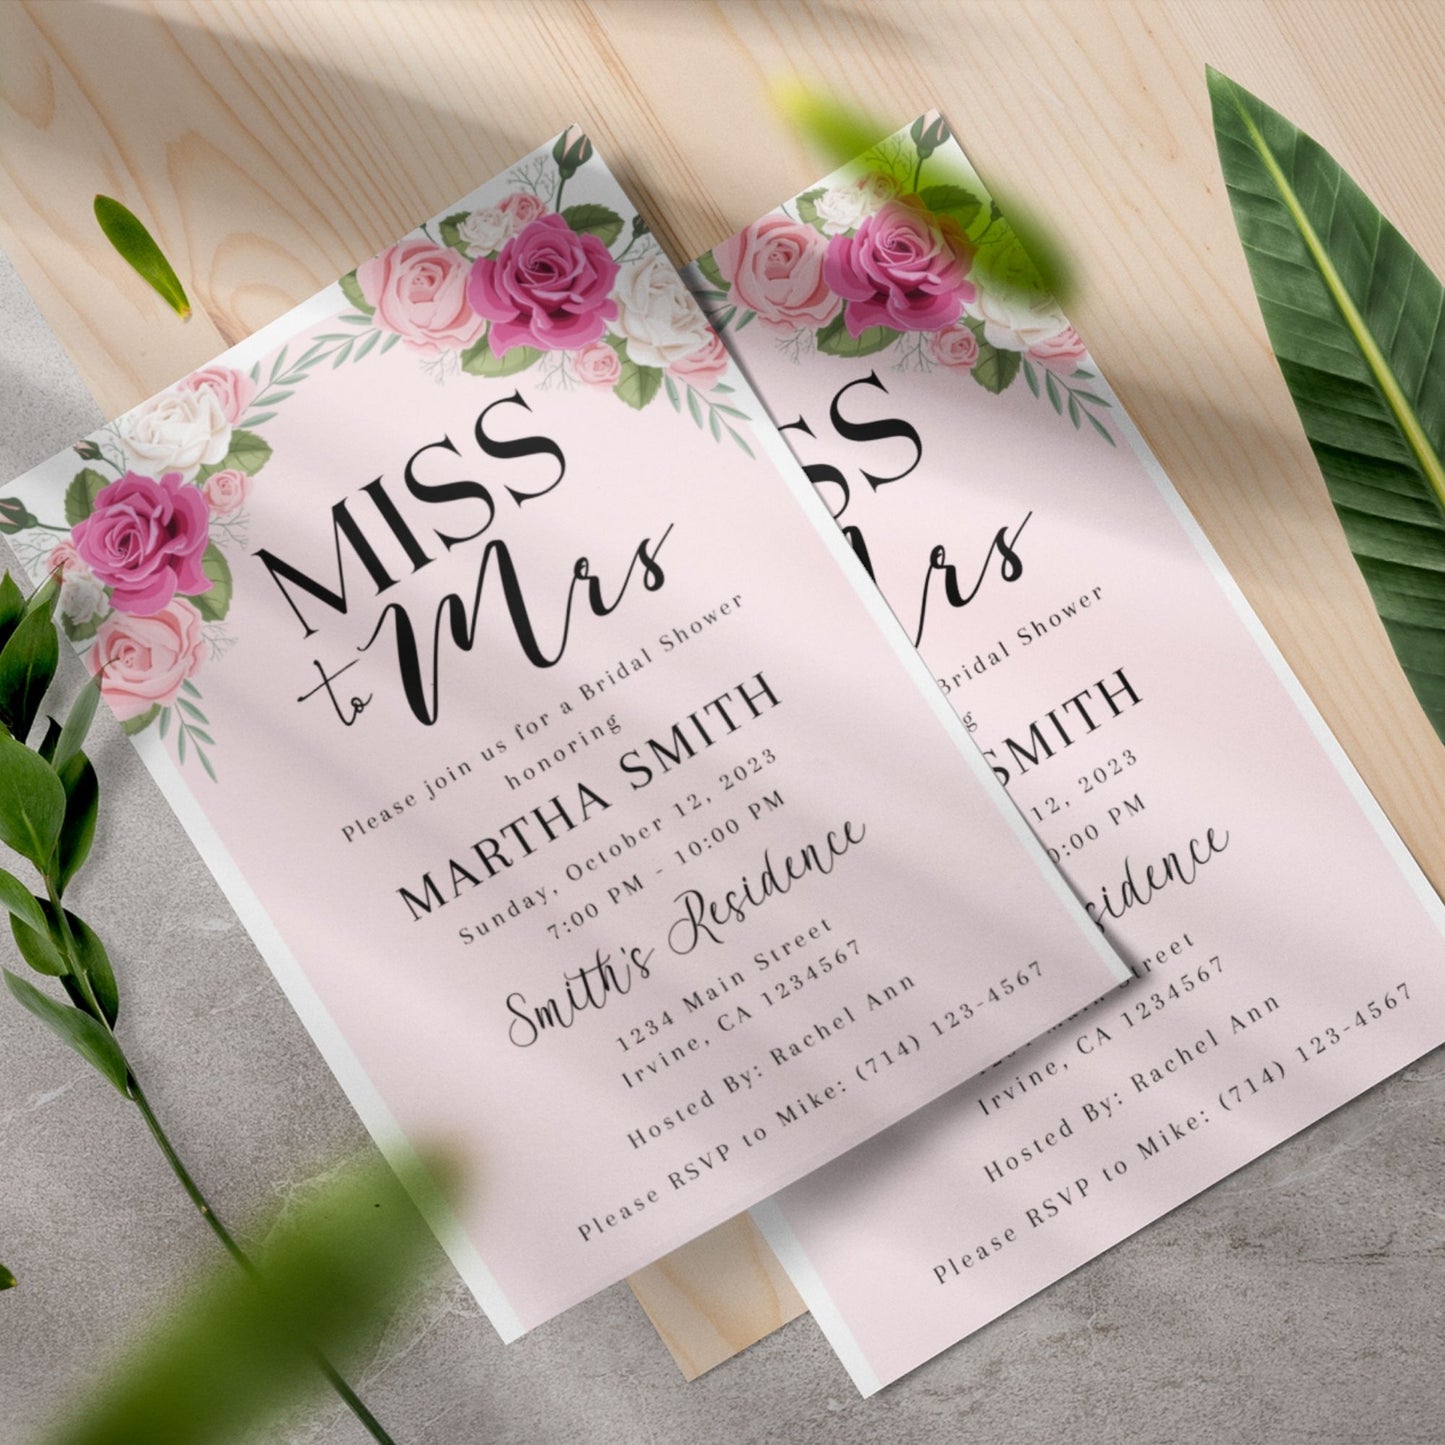 Miss to Mrs Invitation Template